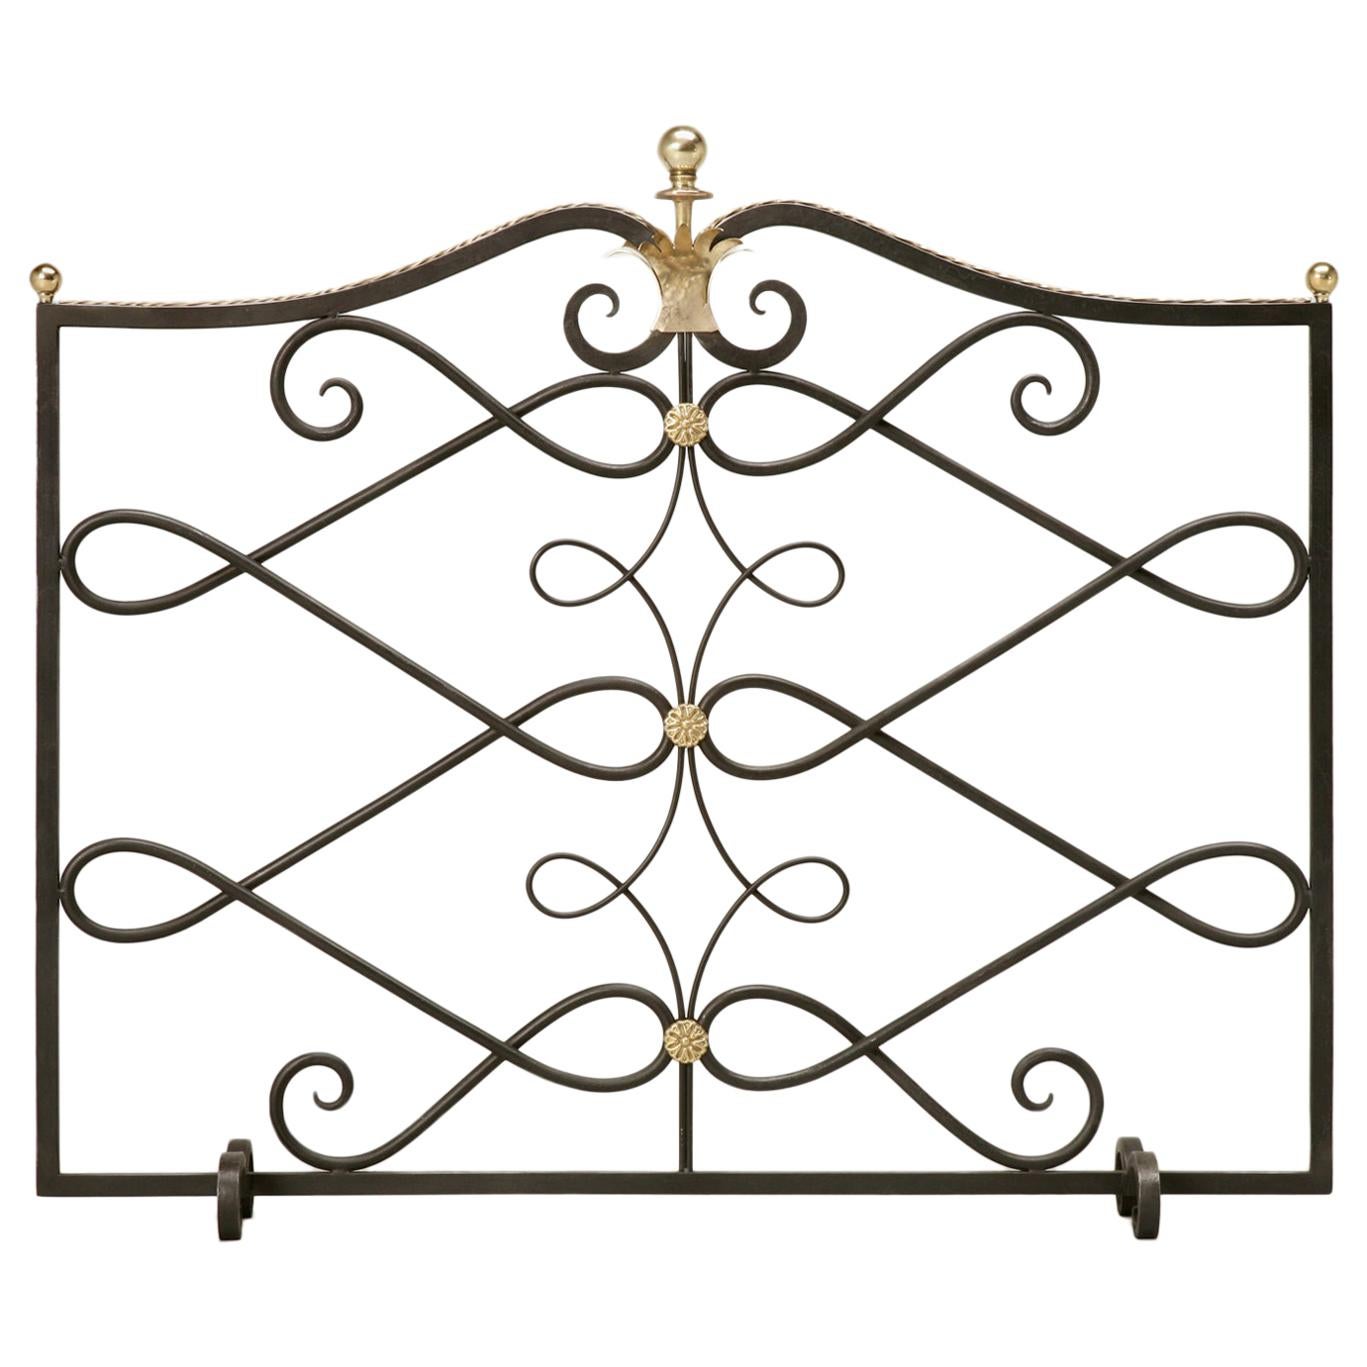 Custom Handmade Steel and Brass Fireplace Screen in any Dimension or Finish